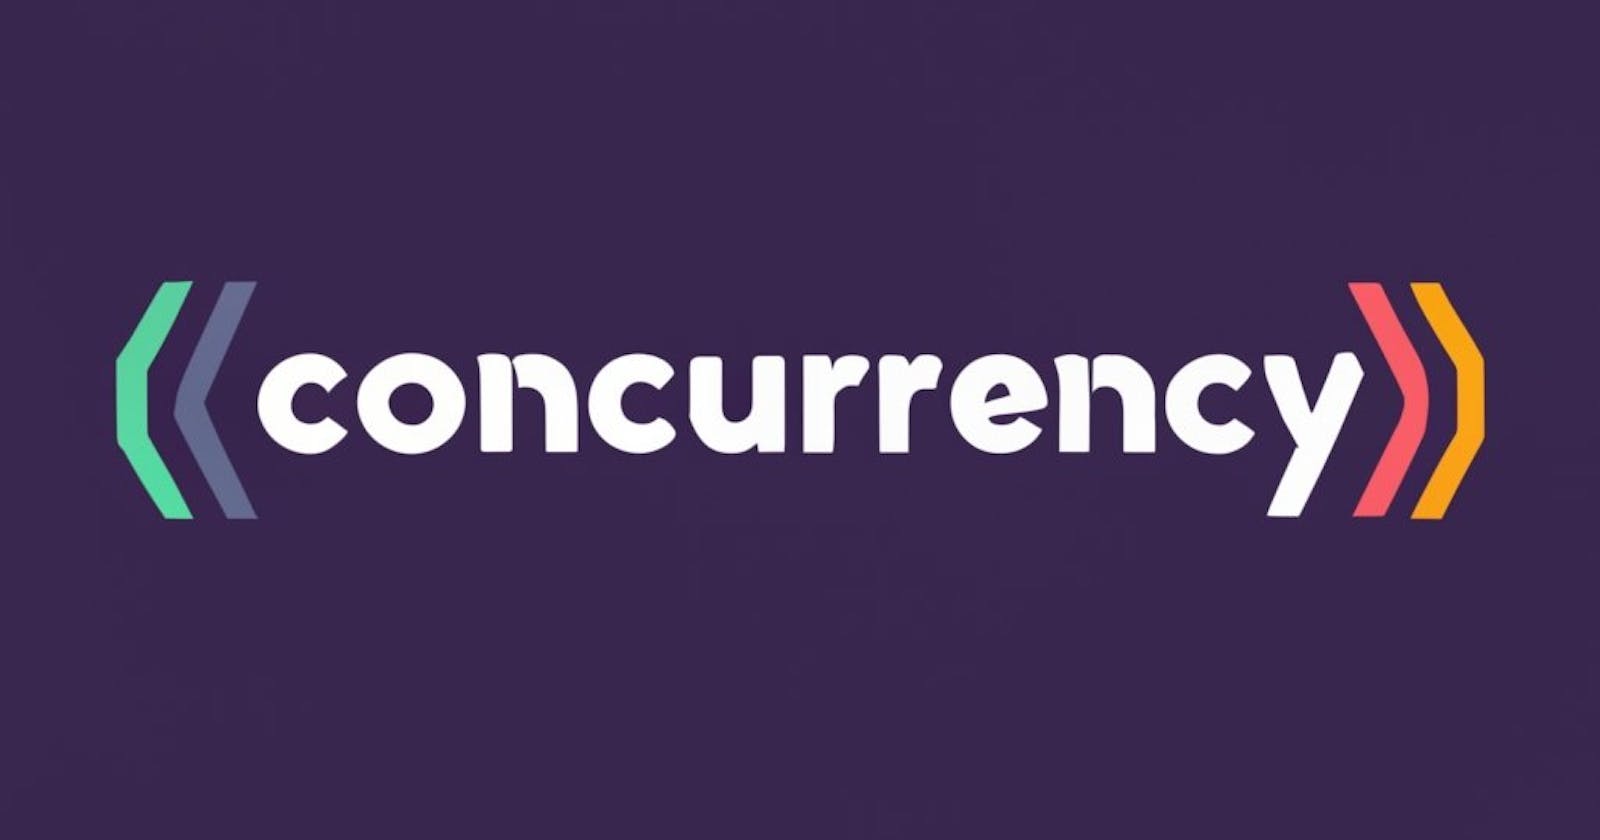 What is concurrency in software engineering?